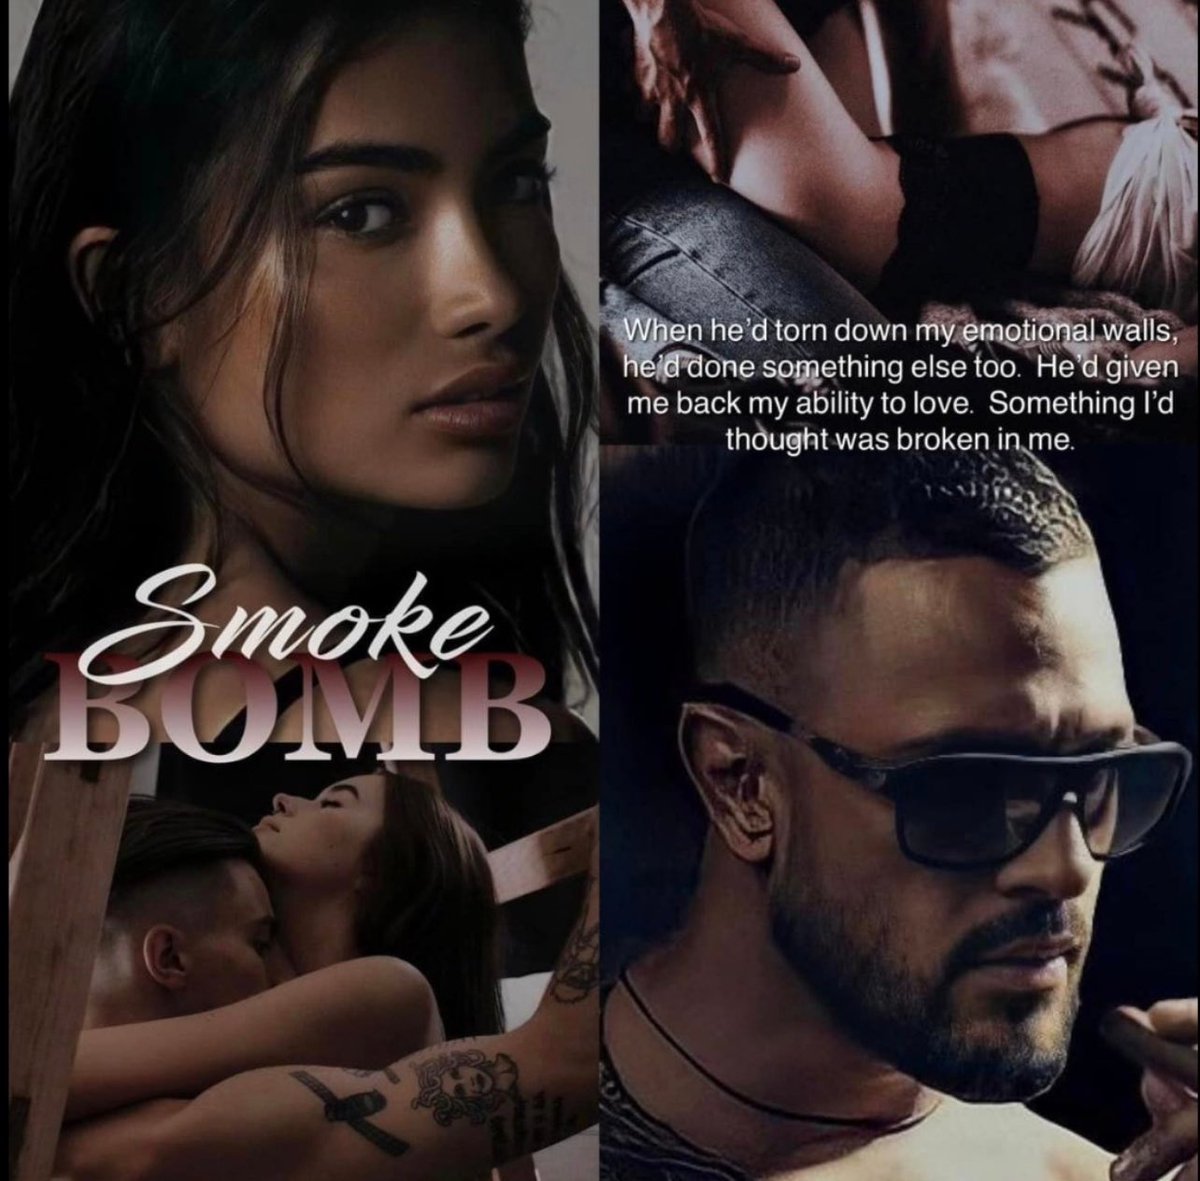 Bully, southern mafia, a little Yellowstone mixed with Sons of Anarchy and SO MUCH HEAT. Hear their story now! Duet style and I am in love with it! audible.com/pd/B0D32D8P6D/… #RomanceNovel #steamyromance #audiobook #BookTwitter